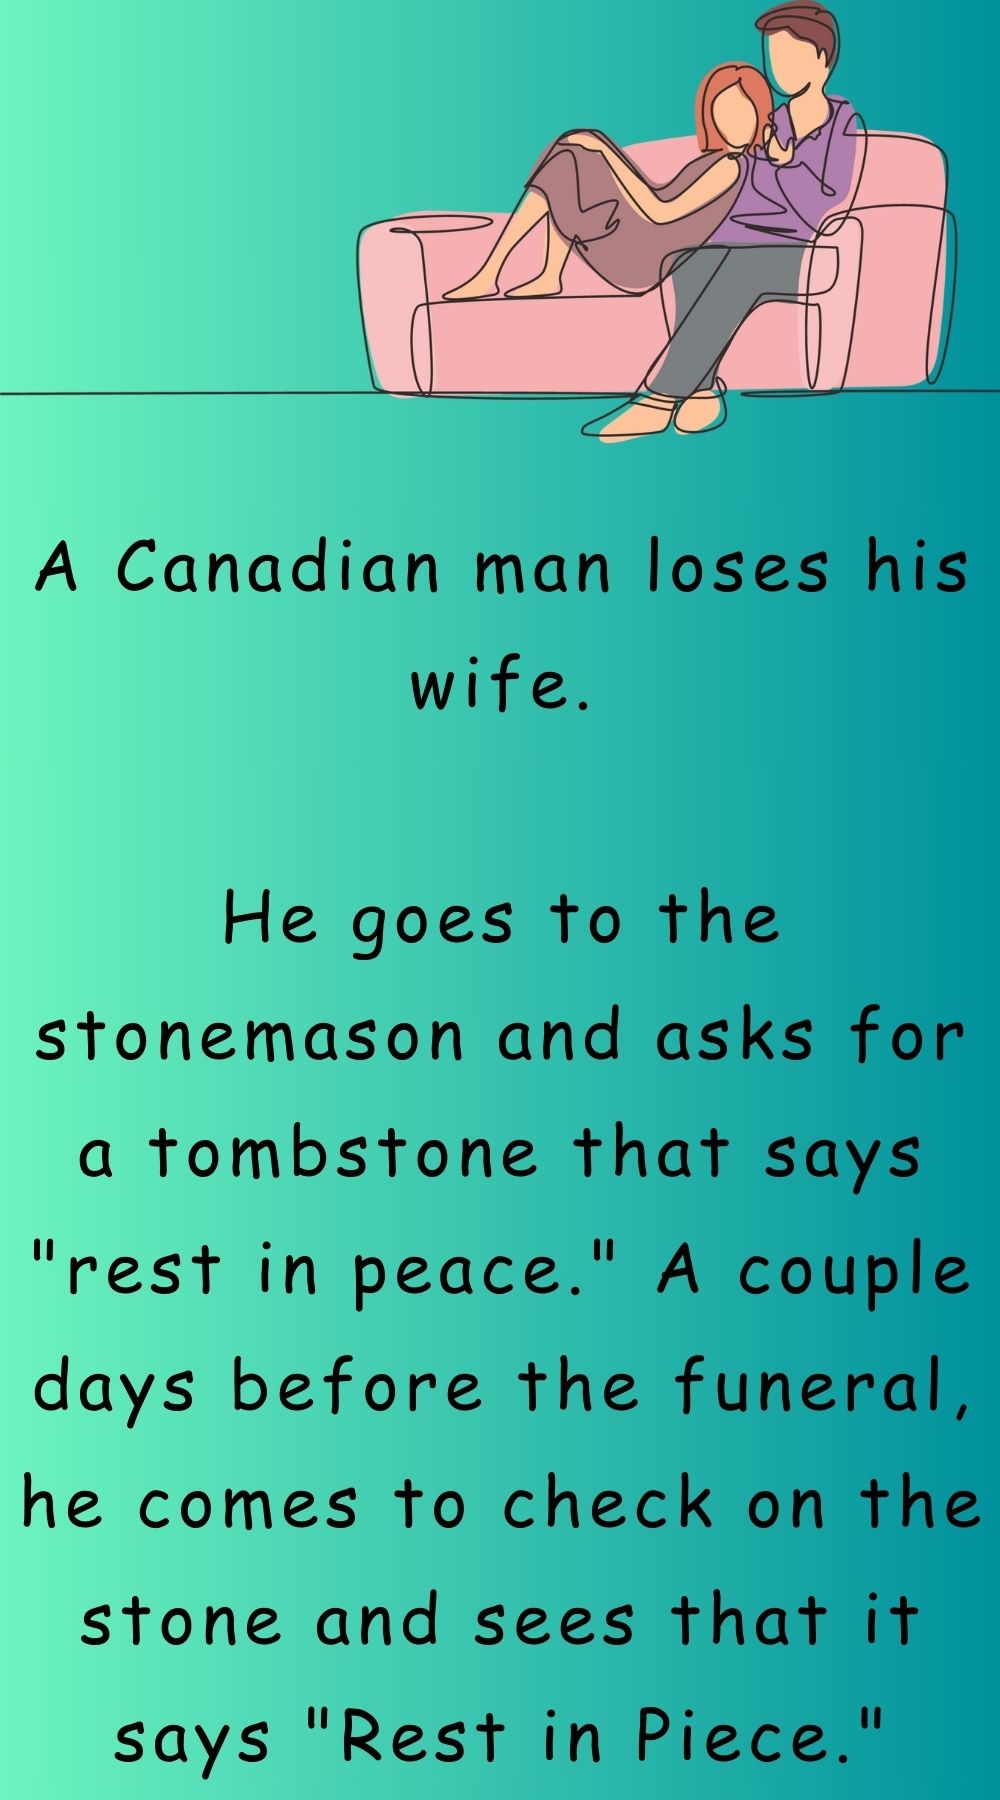 A Canadian man loses his wife